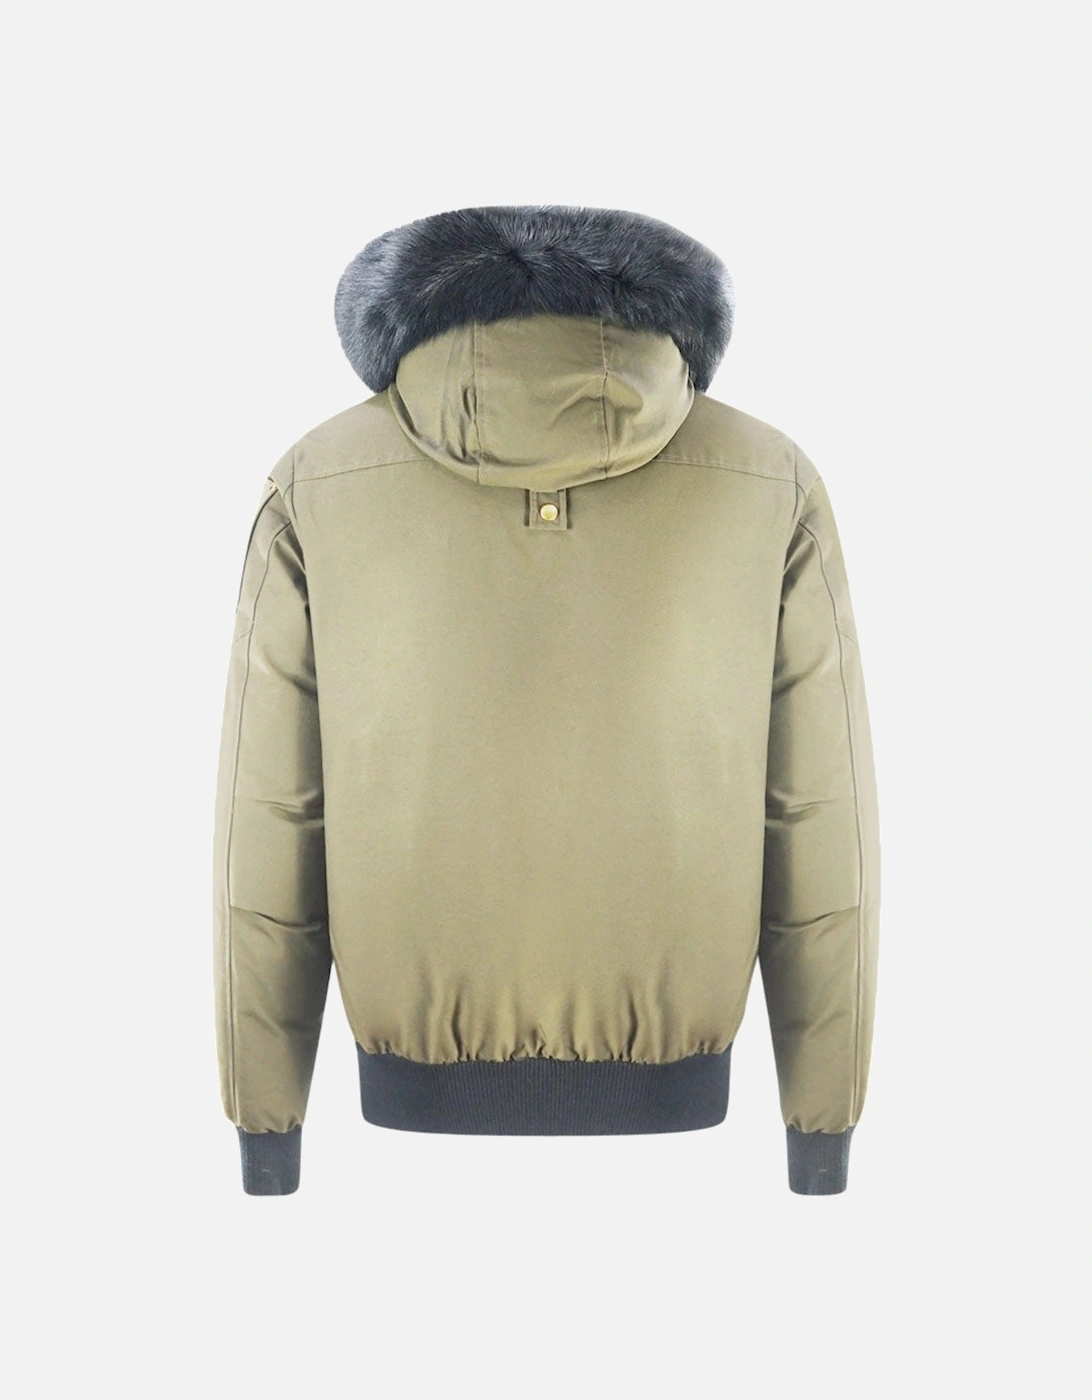 Little Rapids Army Green Bomber Down Jacket